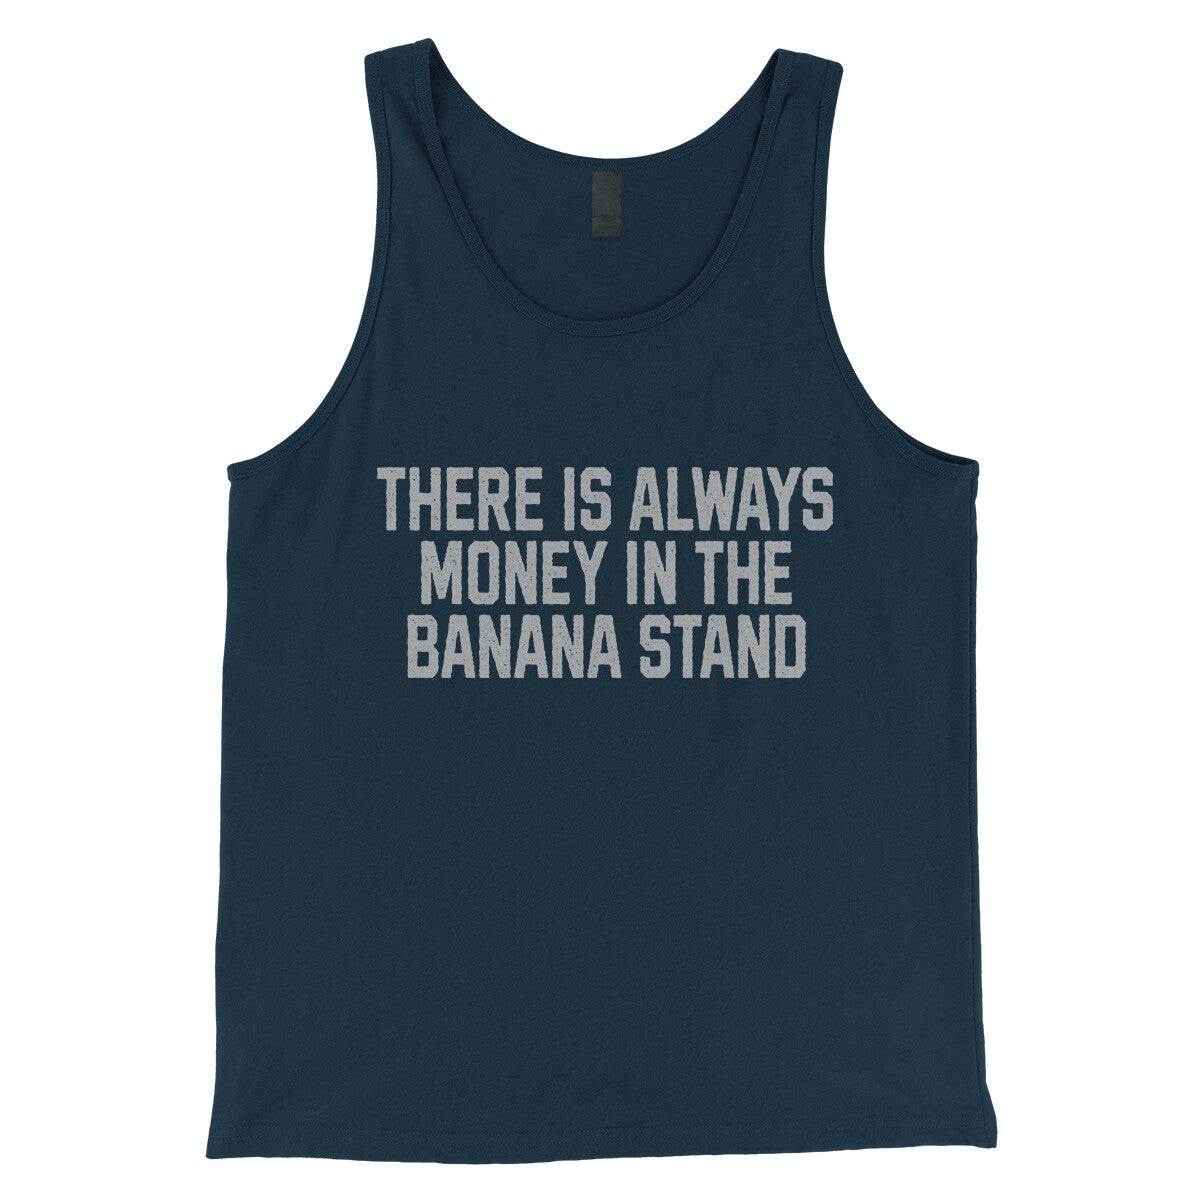 There is Always Money in the Banana Stand in Navy Color